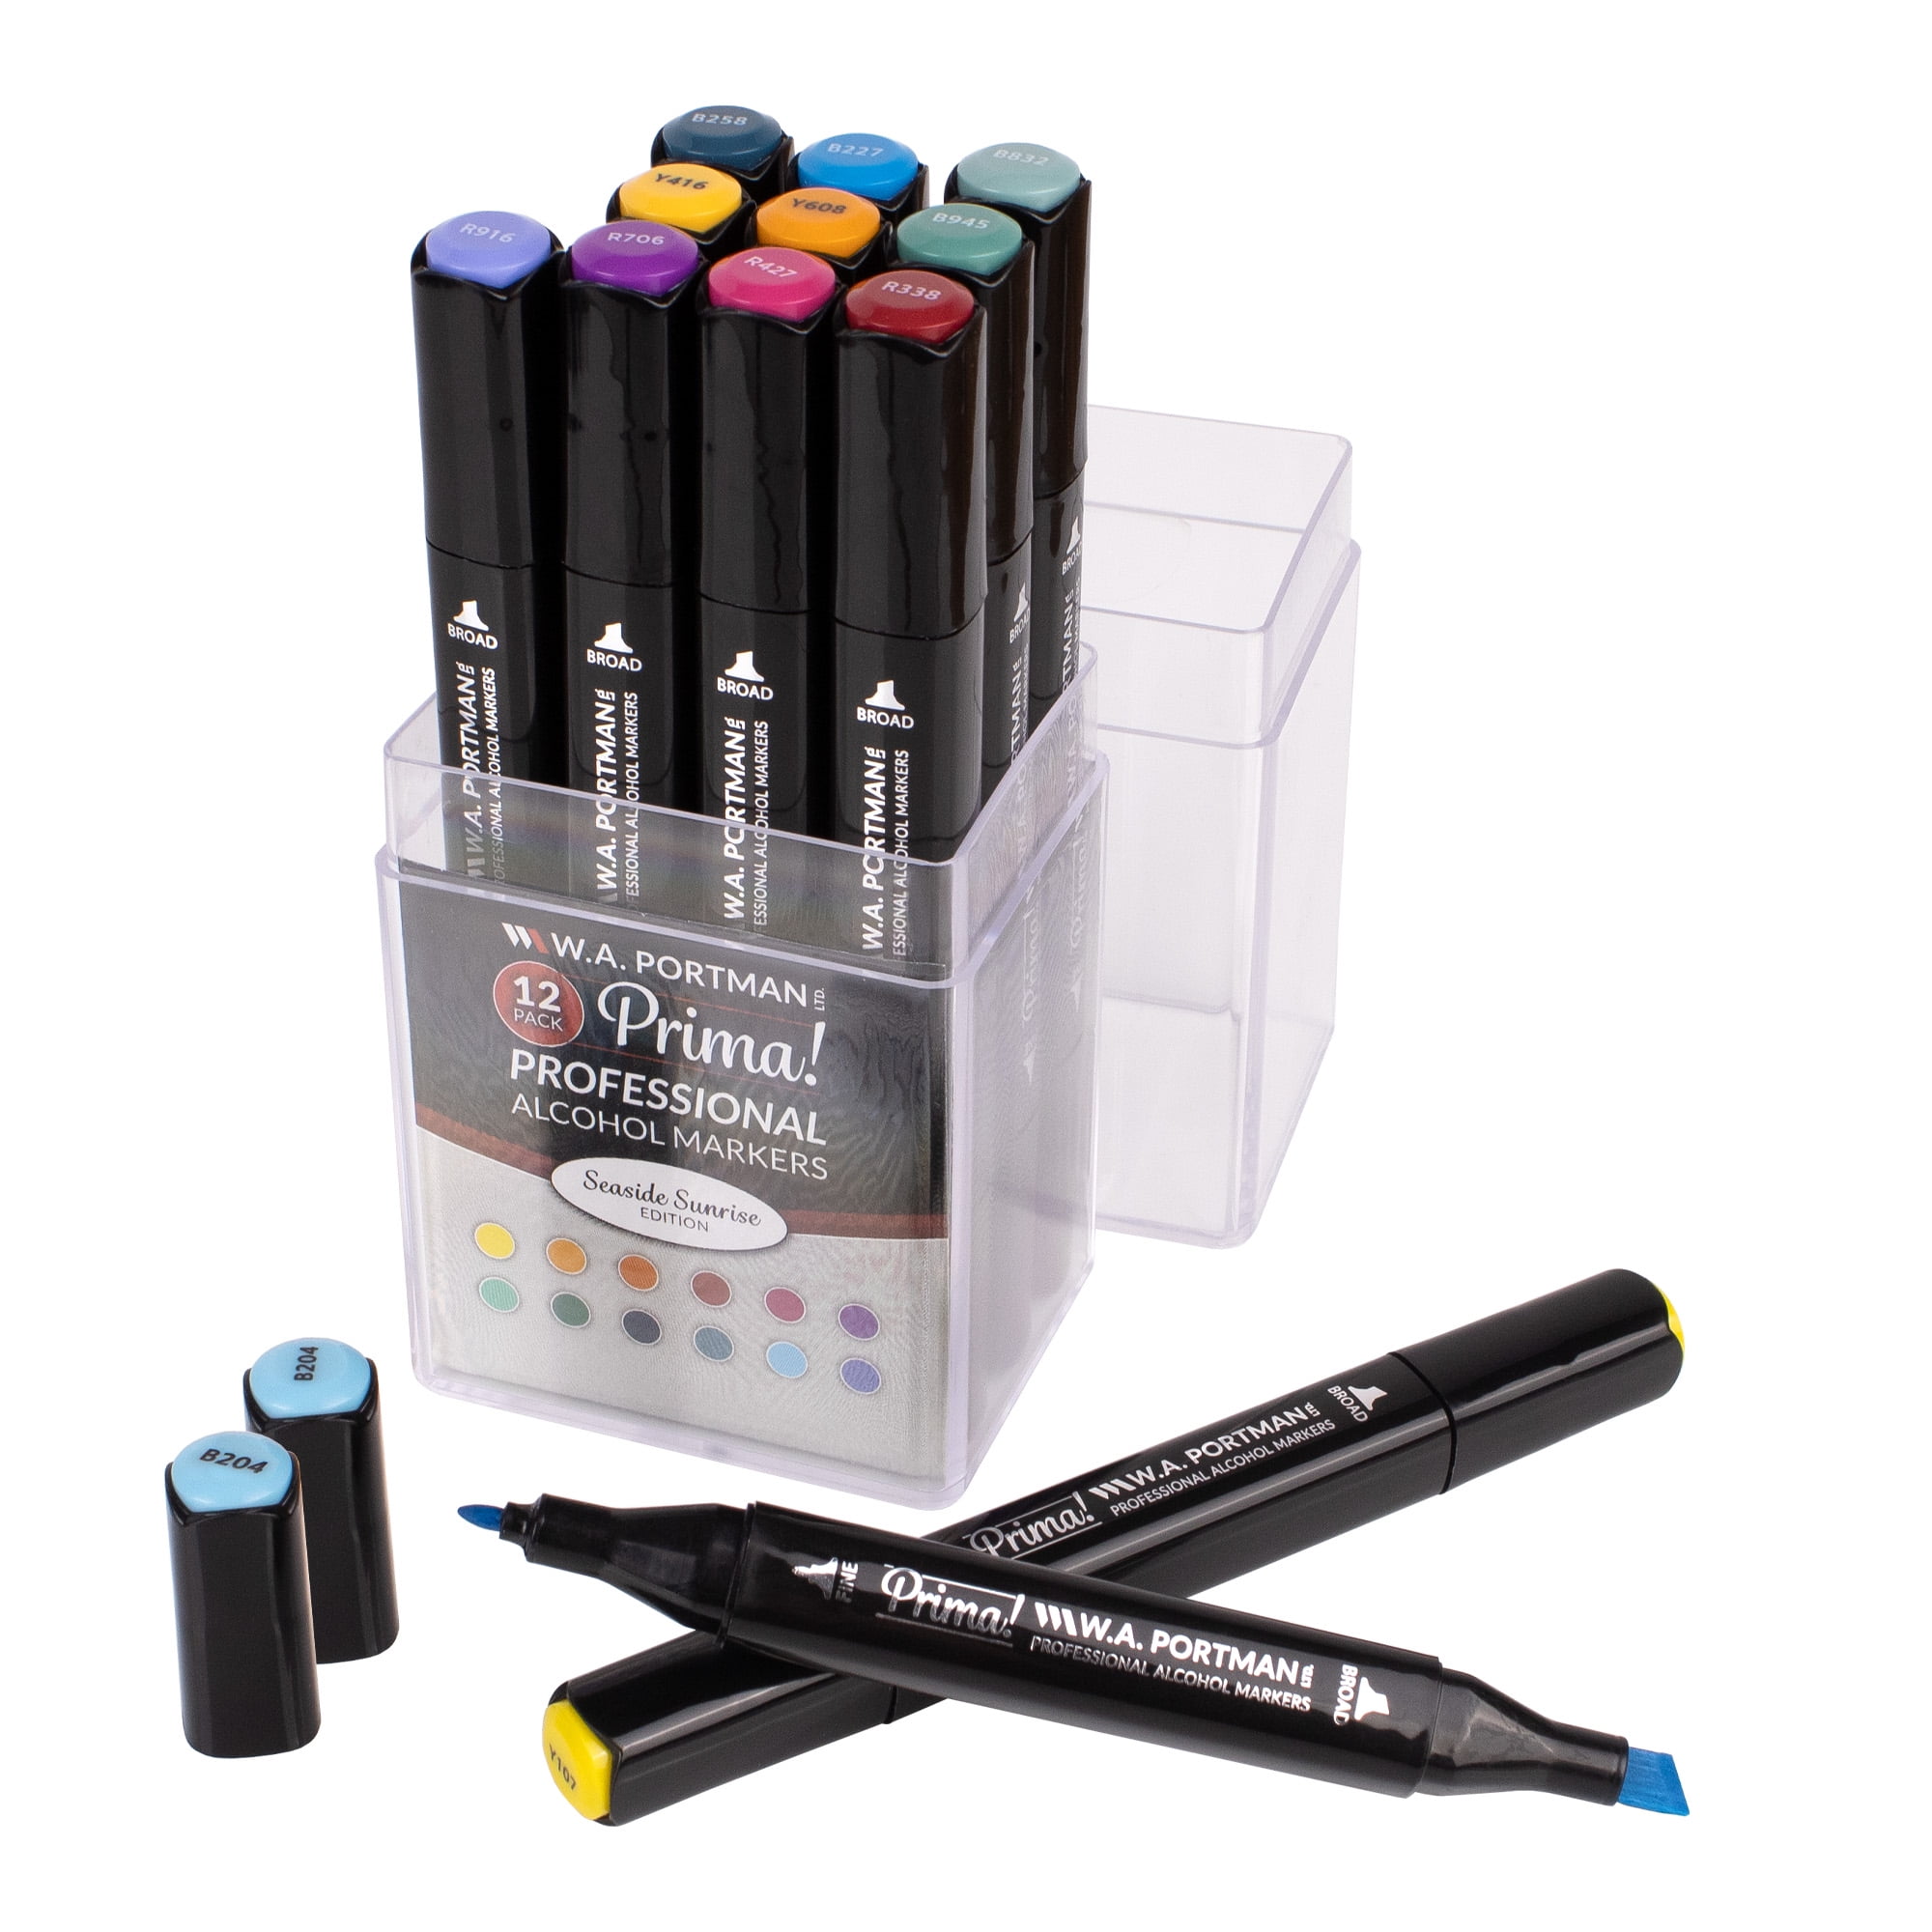 Dos and Don'ts of Using Alcohol Markers – Altenew